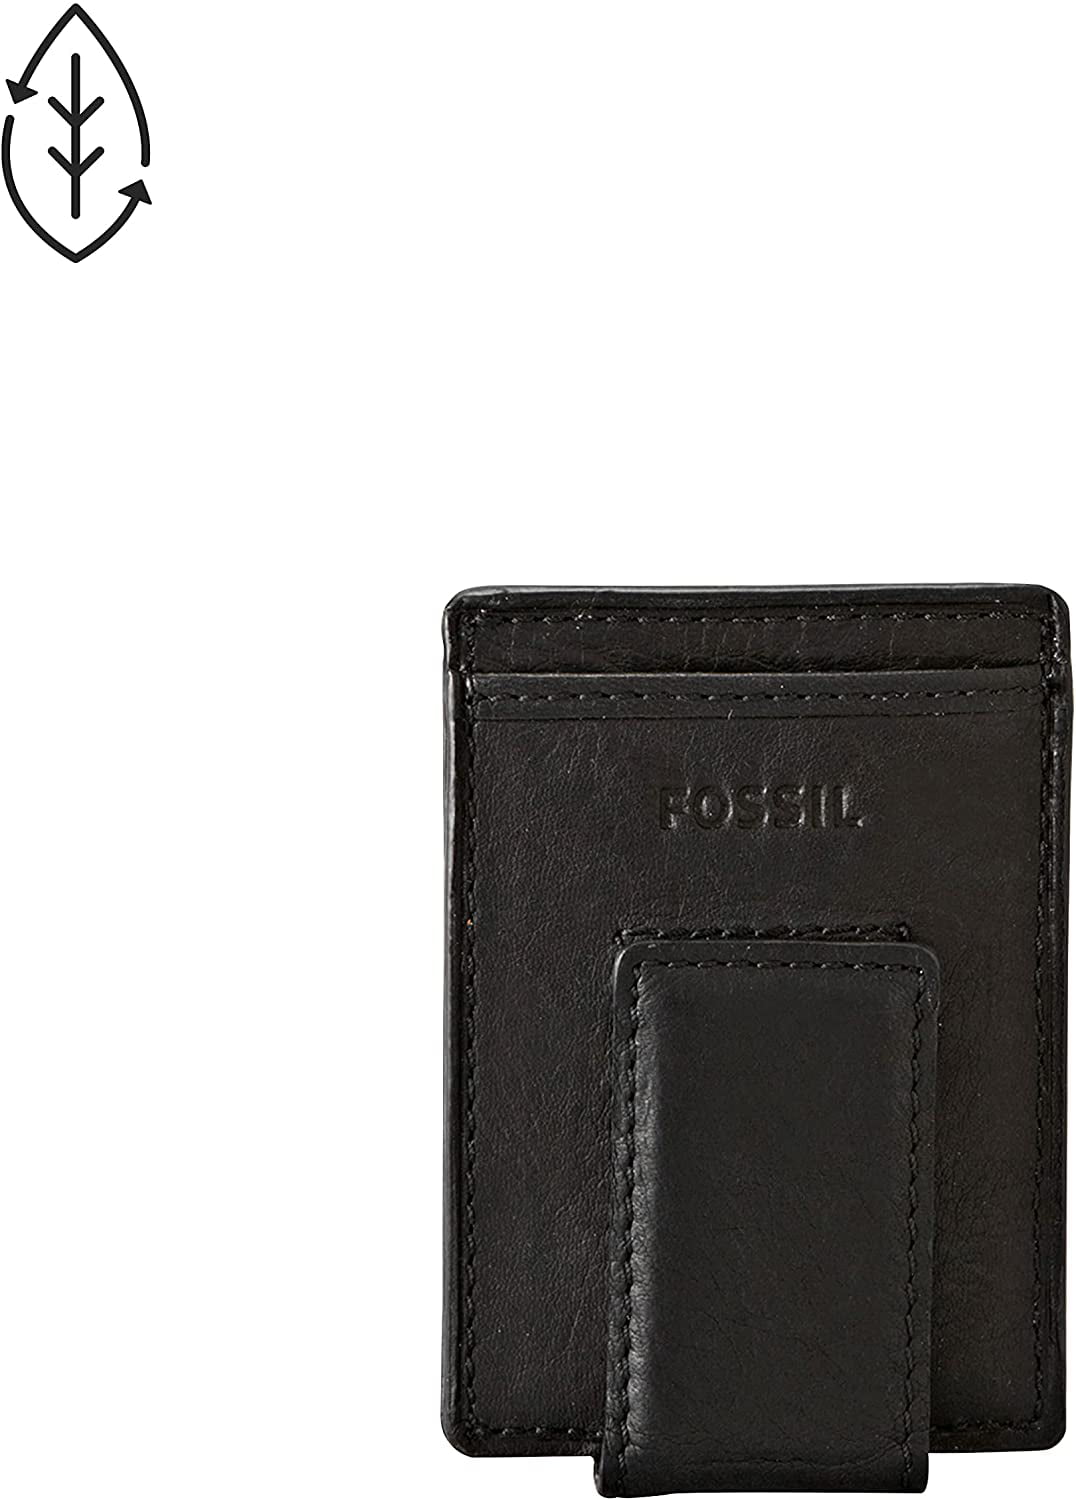 INGVY Mens Wallets Actual Leather Wallet Men Coin Purse Card Holder Man  Male Vallet Clamp for Money Bag (Color : Black Horizontal)